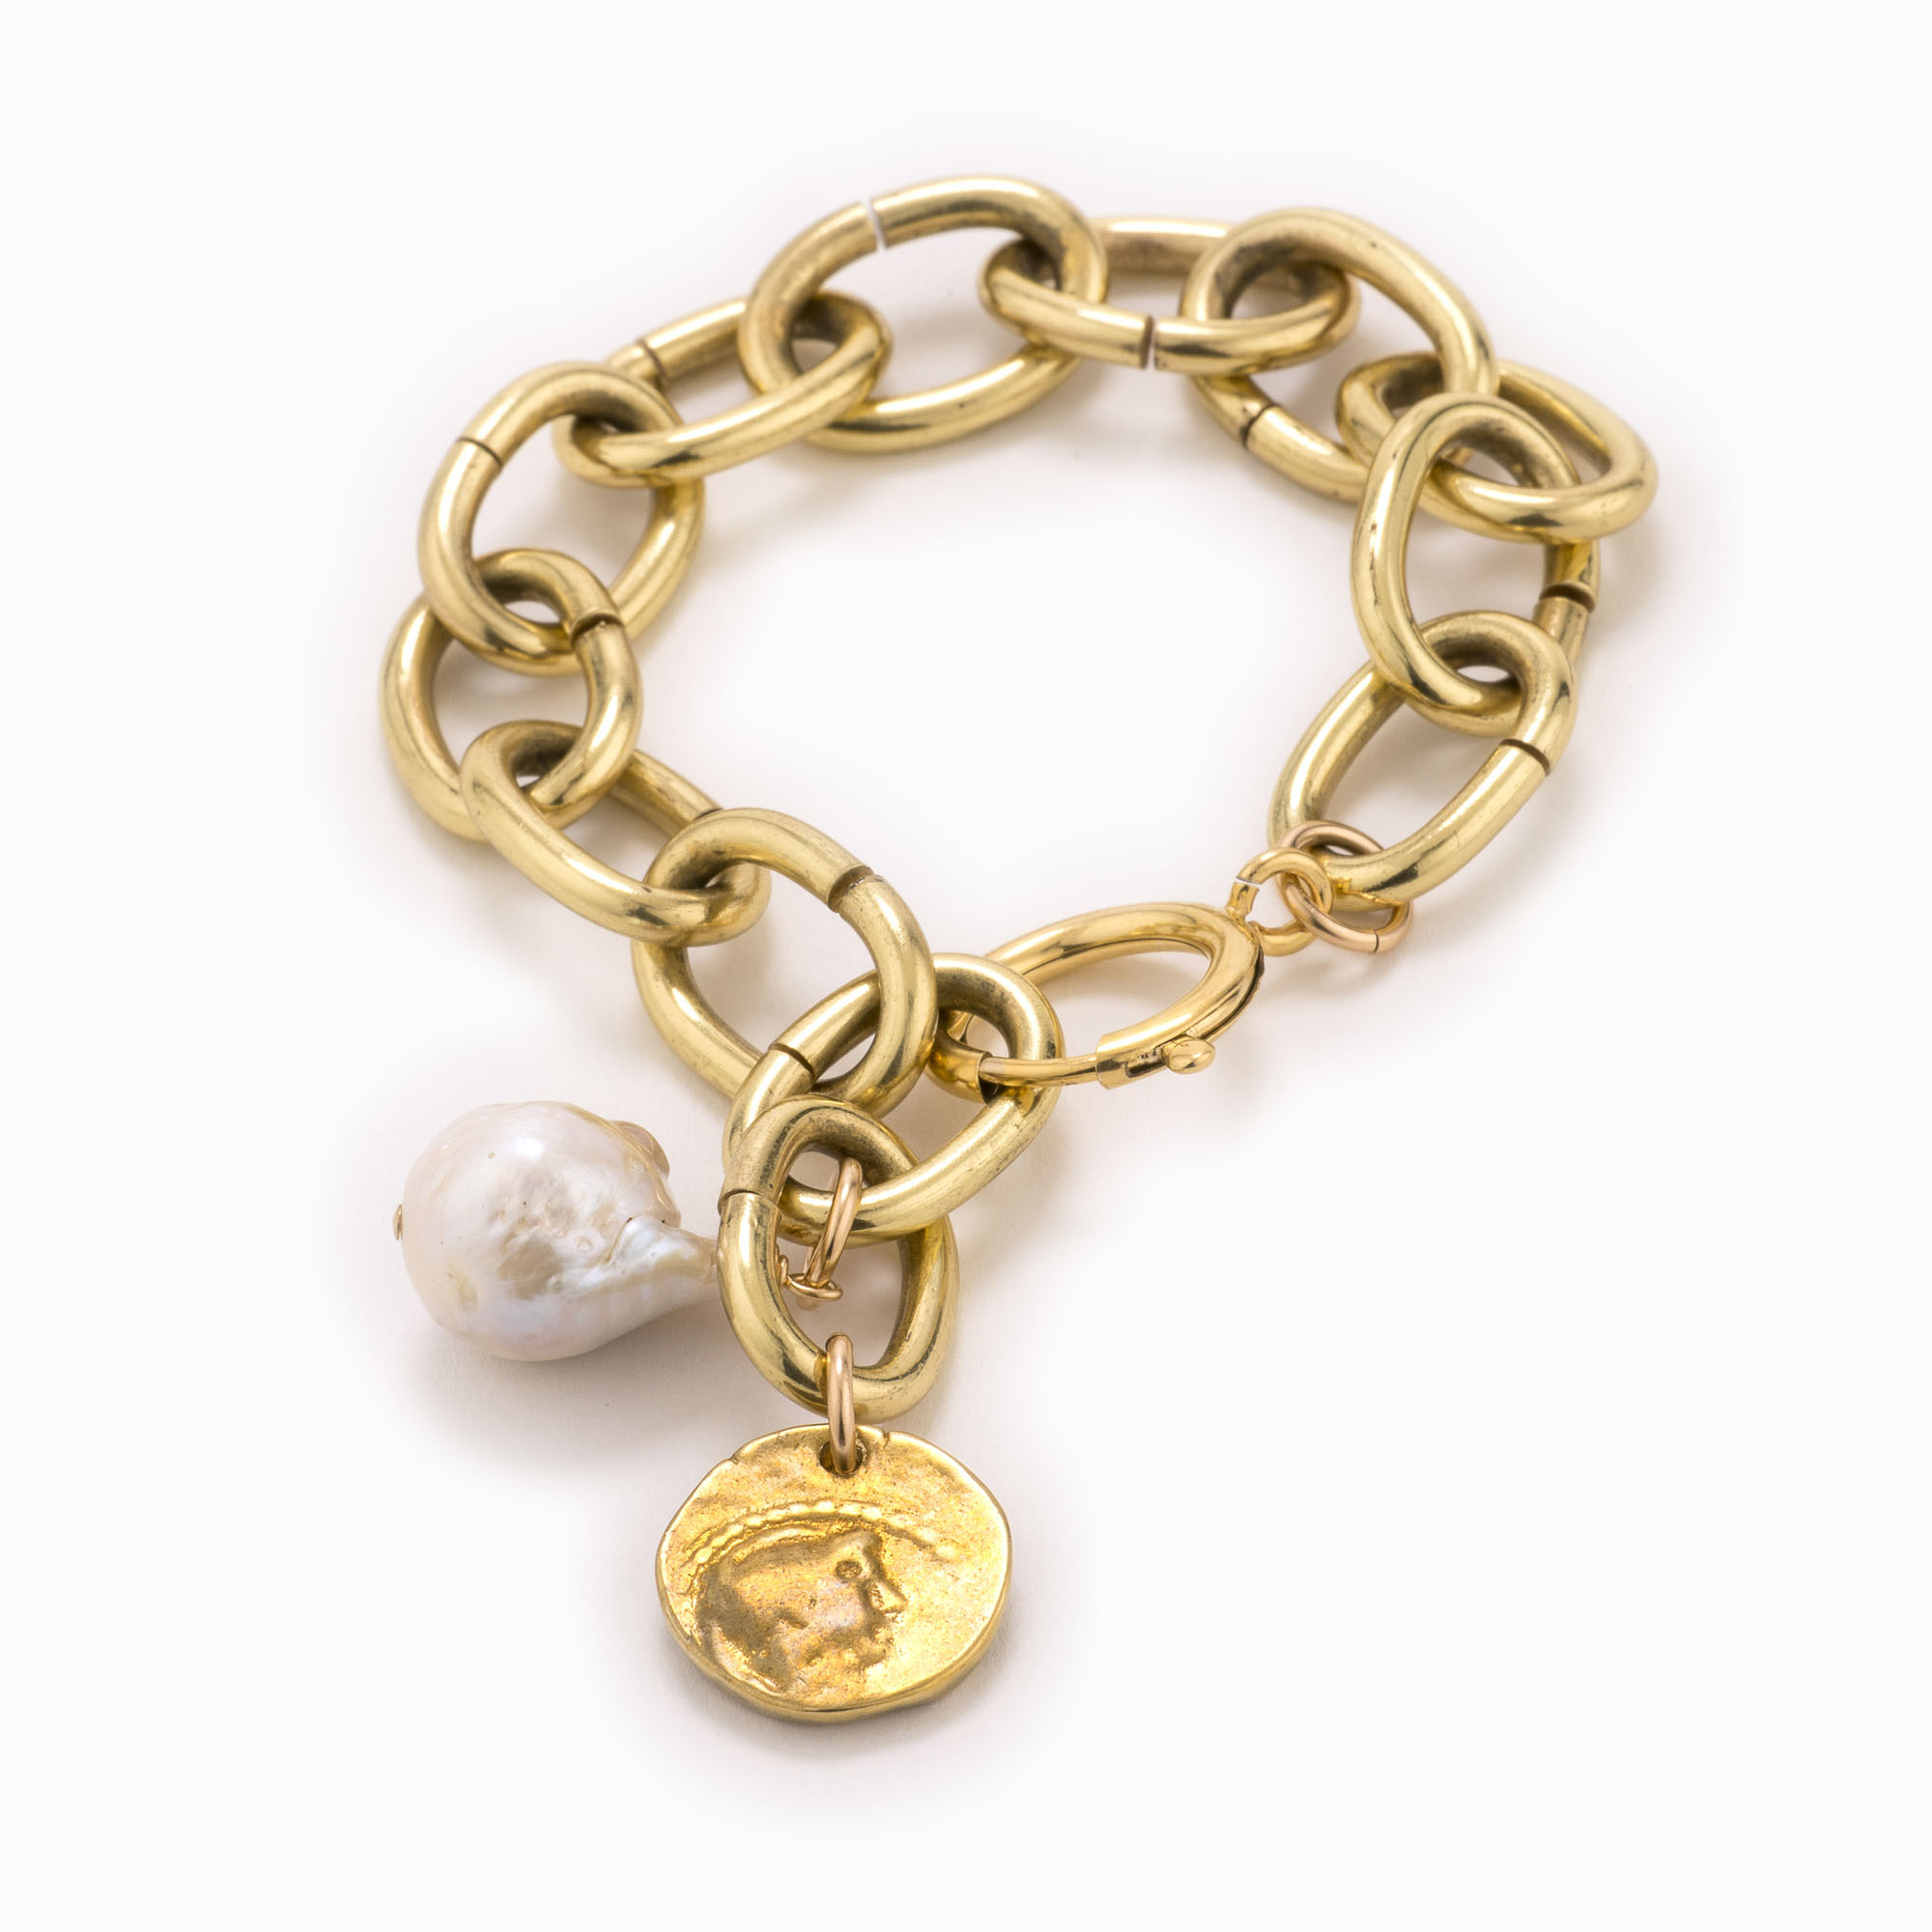 Featured image for “Iman Brass Bracelet”